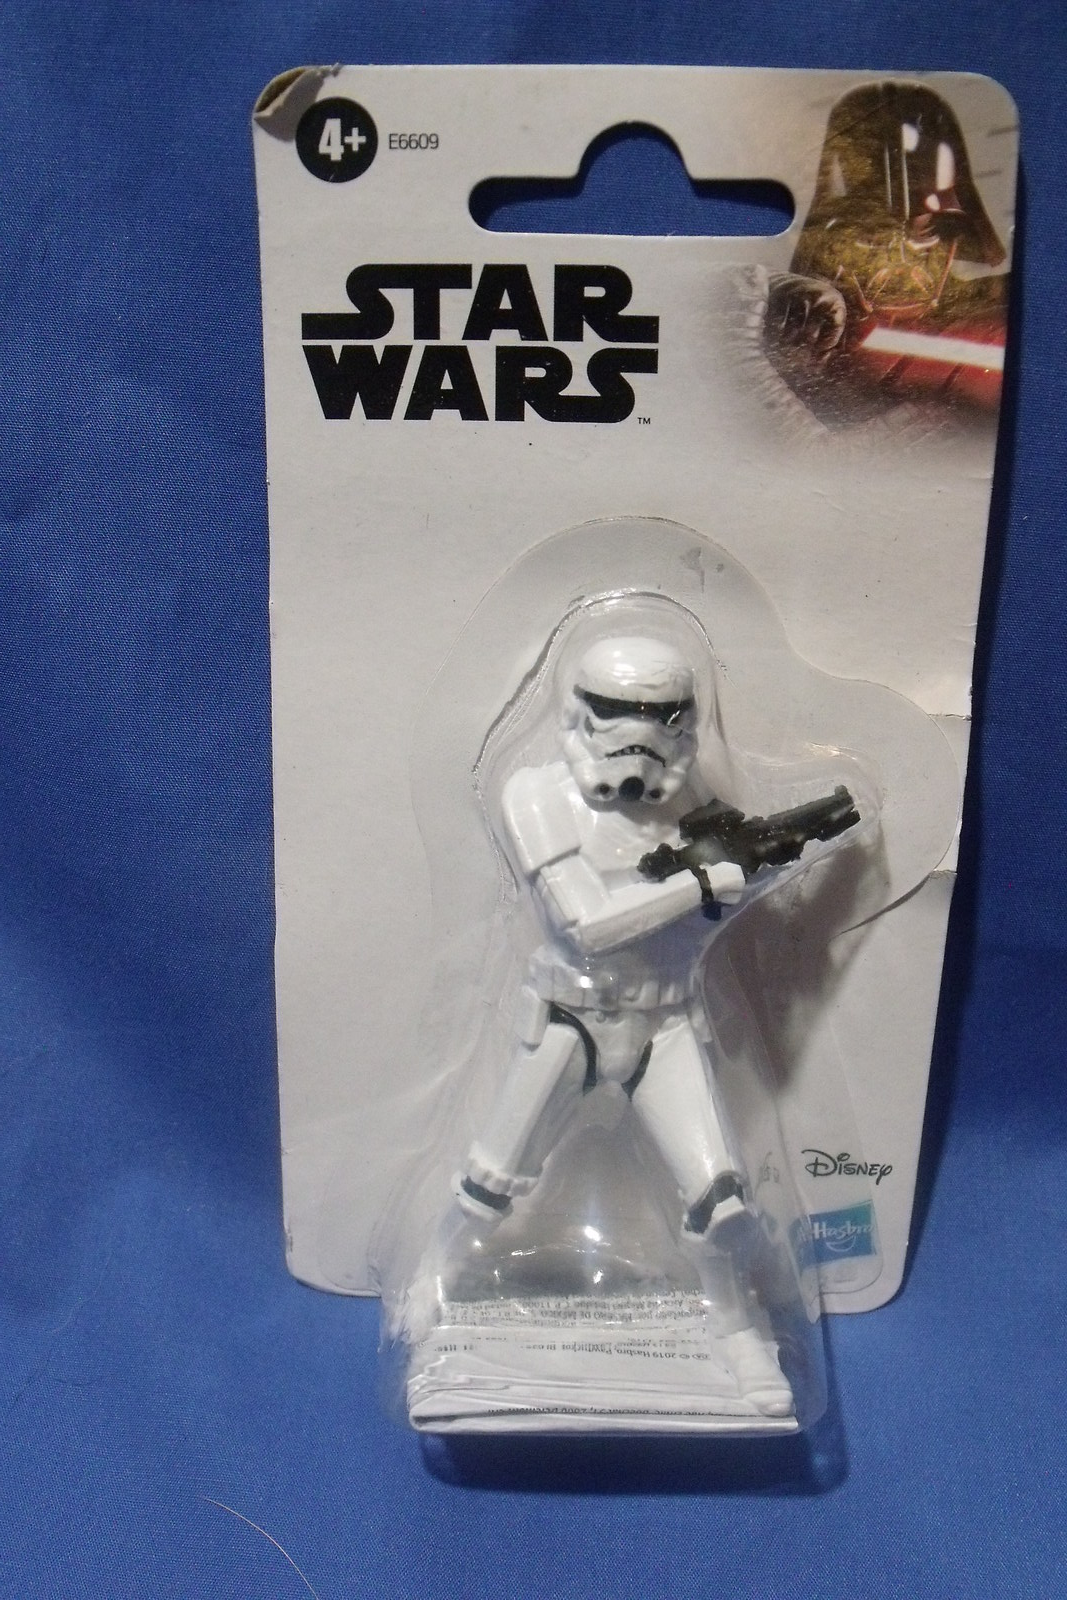 Toys Hasbro Disney Star Wars Stromtrooper Action Figure 4 inches tall